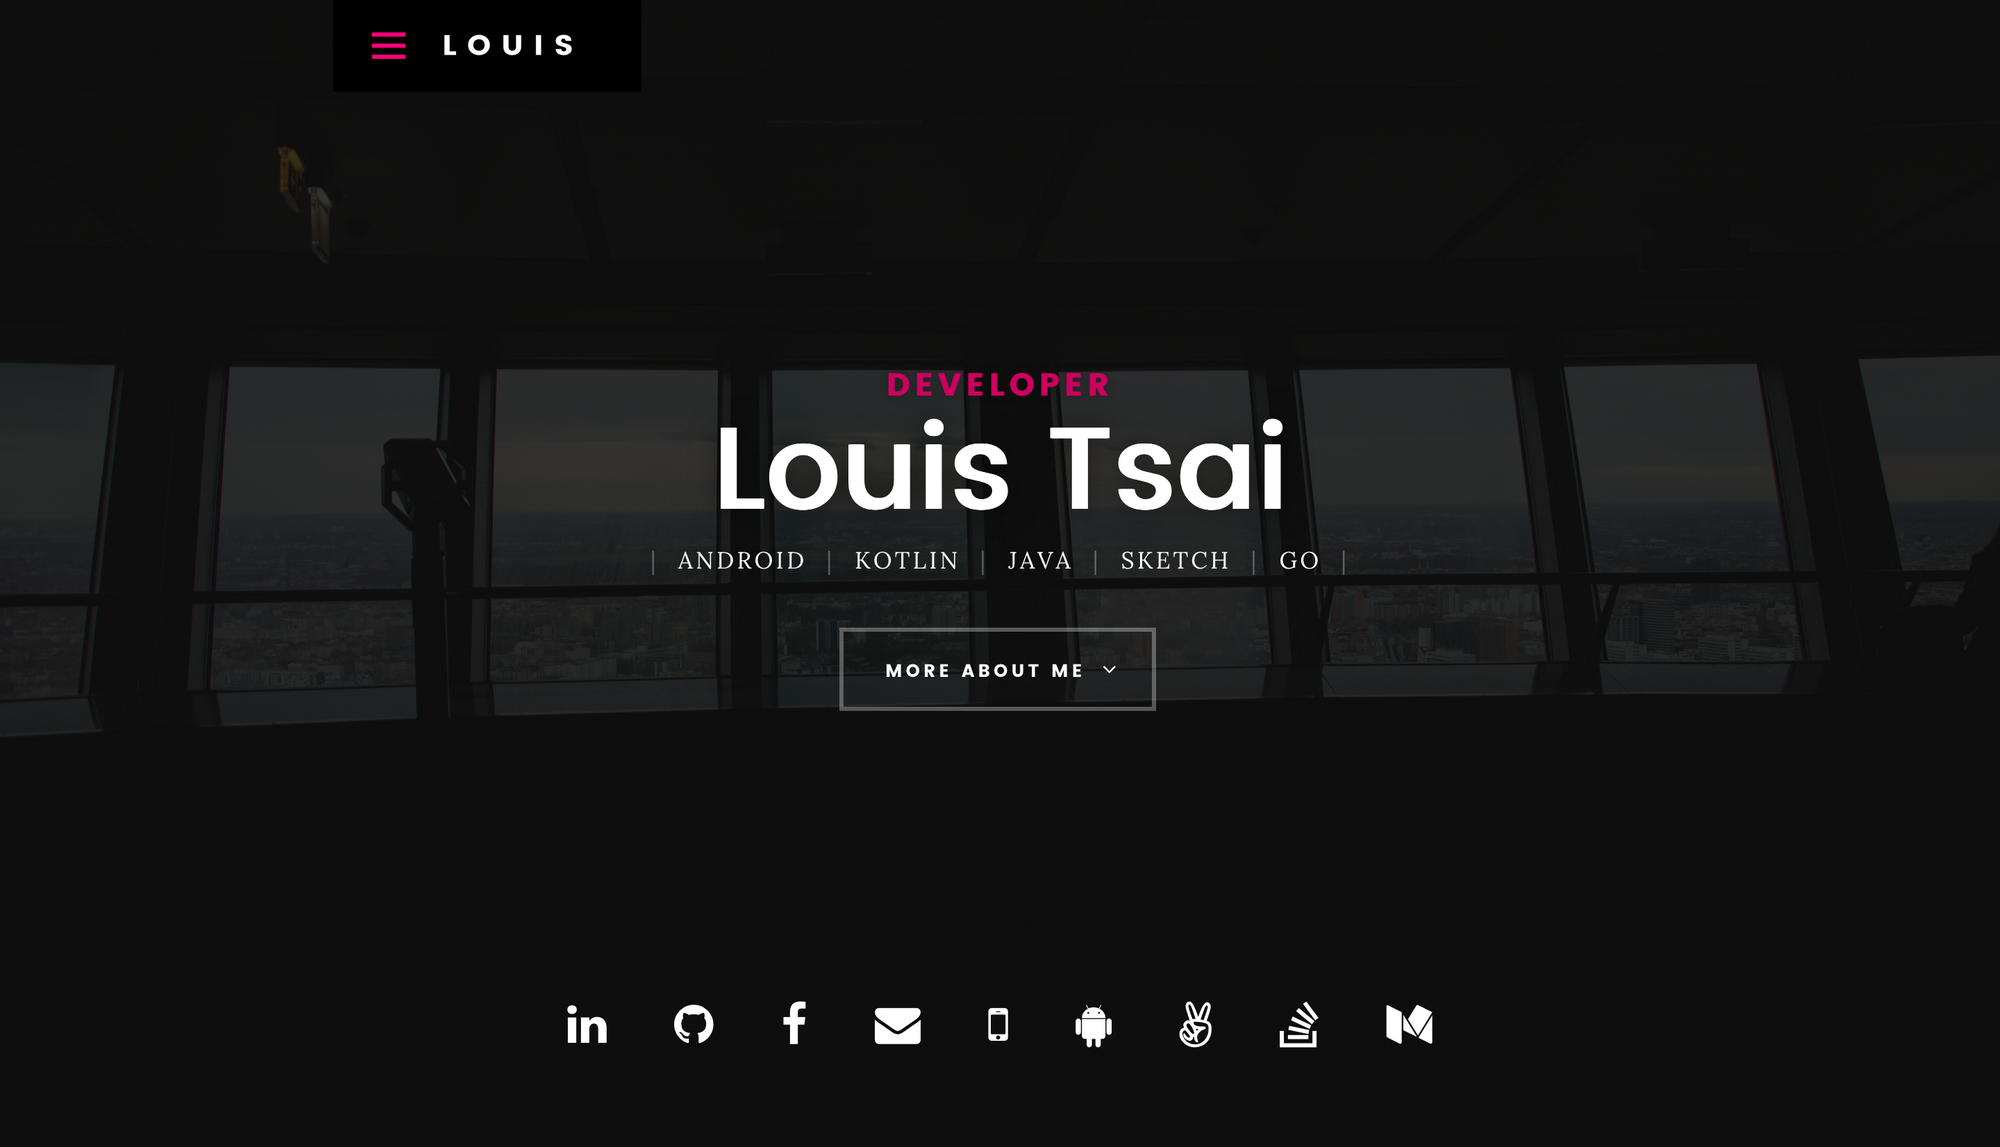 A screenshot of my website back in about 2018. It writes "Developer - Louis Tsai; Android, Kotlin, Java, Sketch, Go", followed by 9 icons to different contacts such as LinkedIn, GitHub, Facabook, etc.